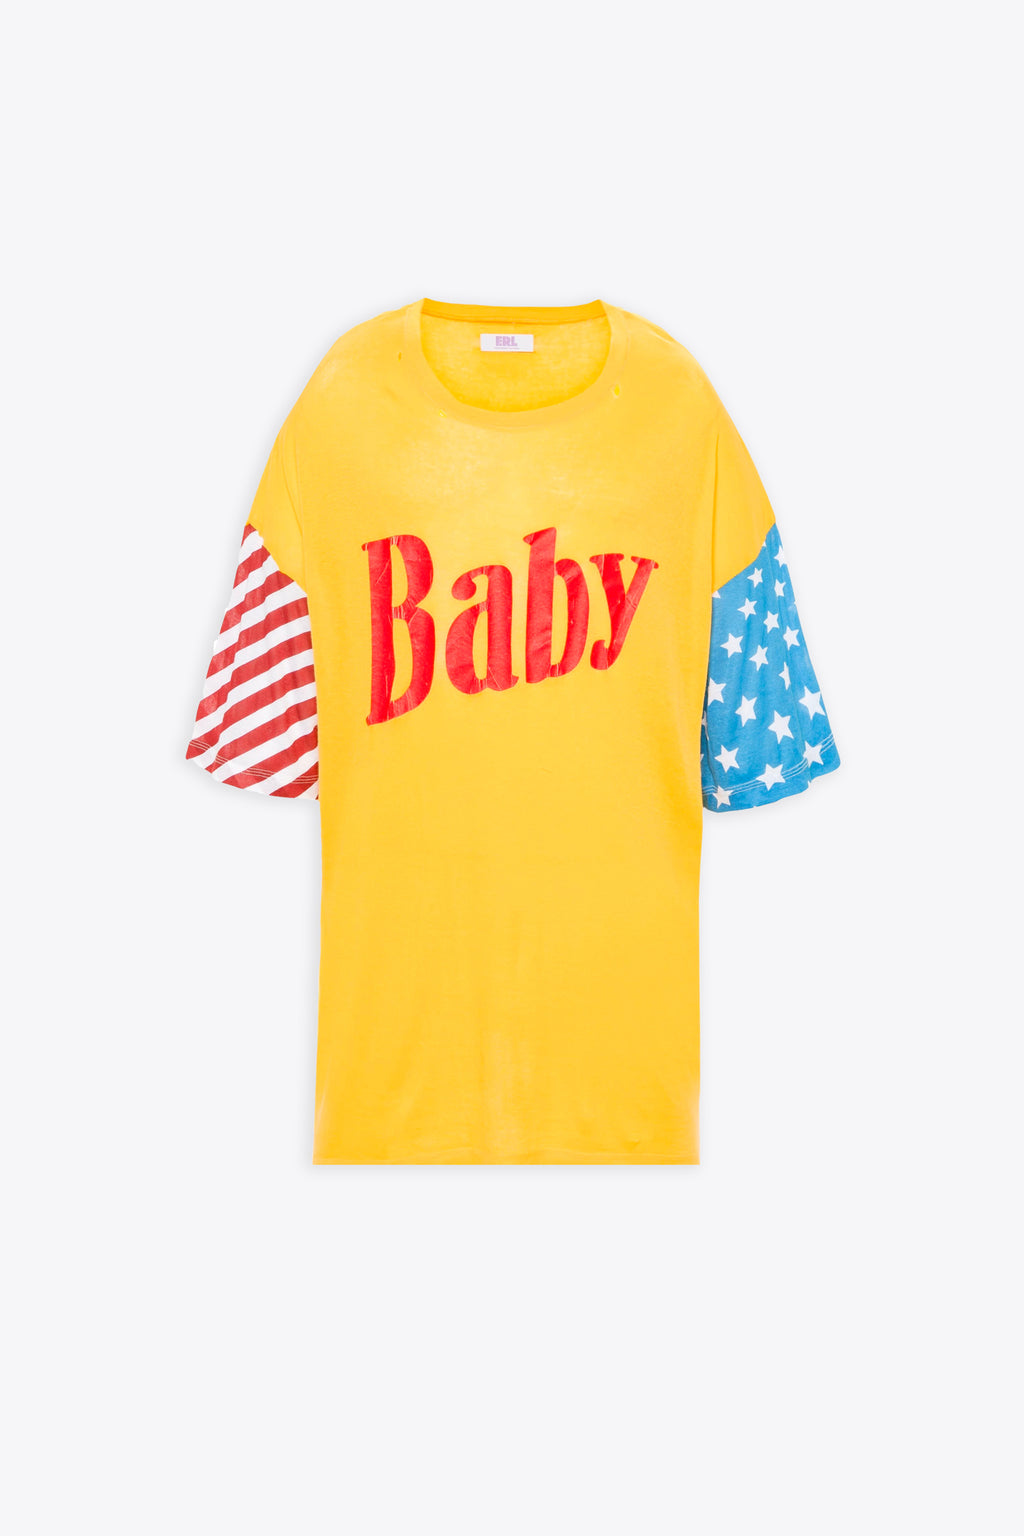 alt-image__Yellow-distressed-cotton-t-shirt-with-Baby-print---Unisex-Printed-Light-Jersey-T-shirt